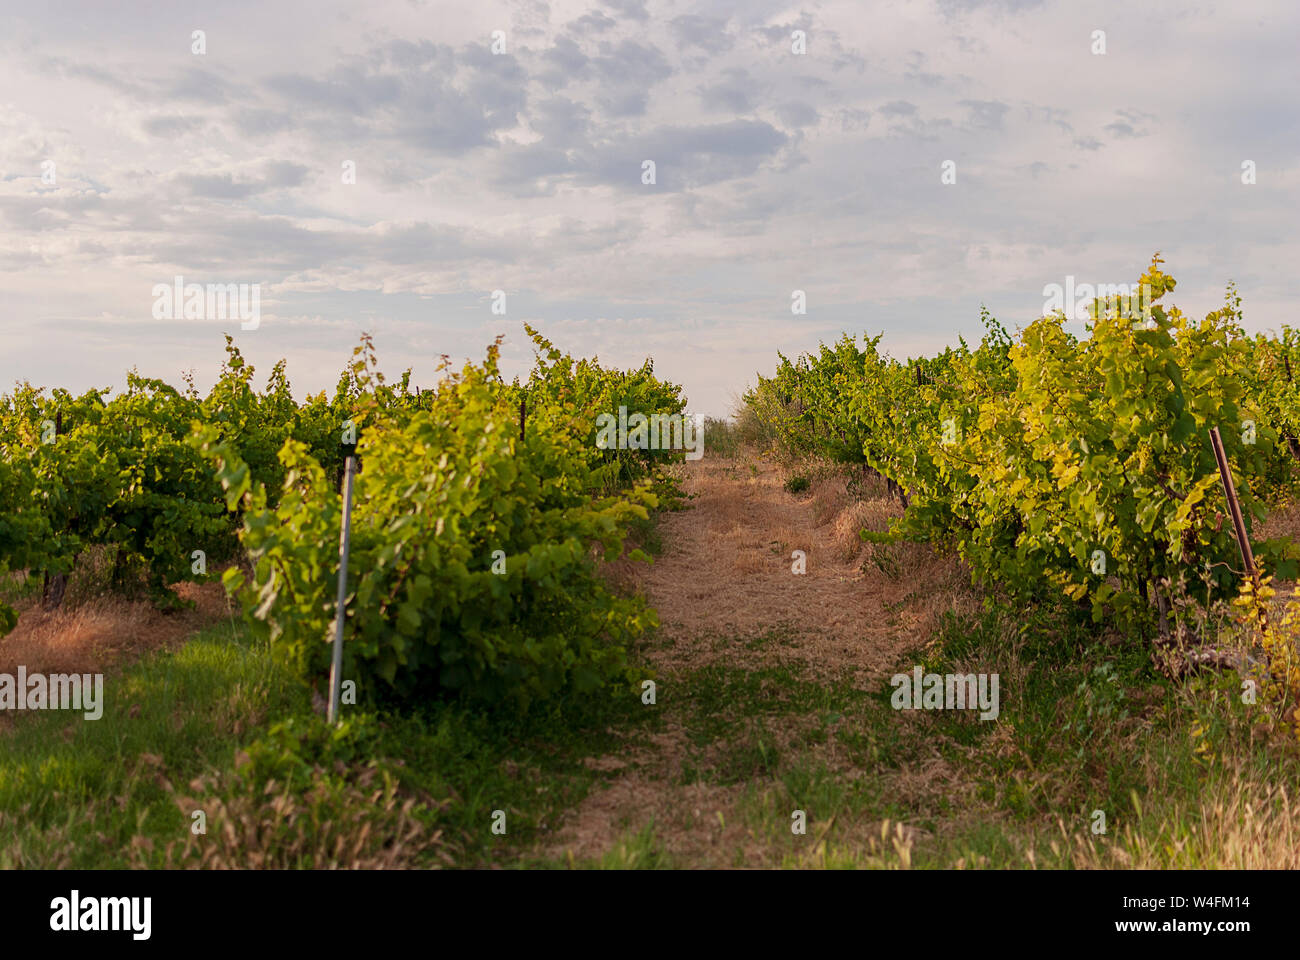 Raimat vineyard landscapes with the system of irrigation by dripping water, at sunset. Raimat wines. Cabernet Sauvignon, Merlot, syrah, Ull de llebre, Stock Photo